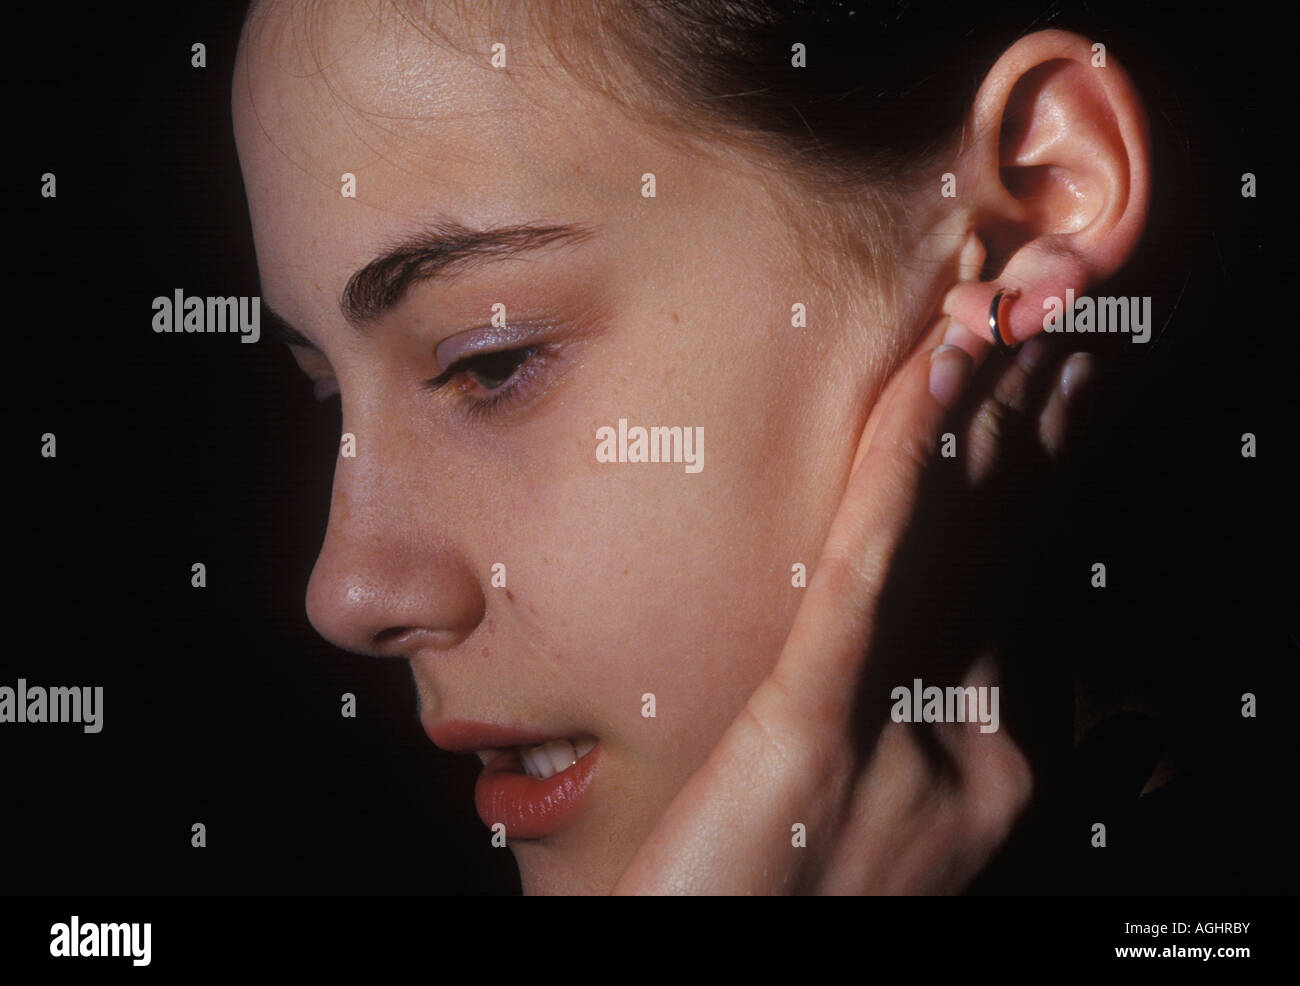 teenage girl playing with an infected earing Stock Photo